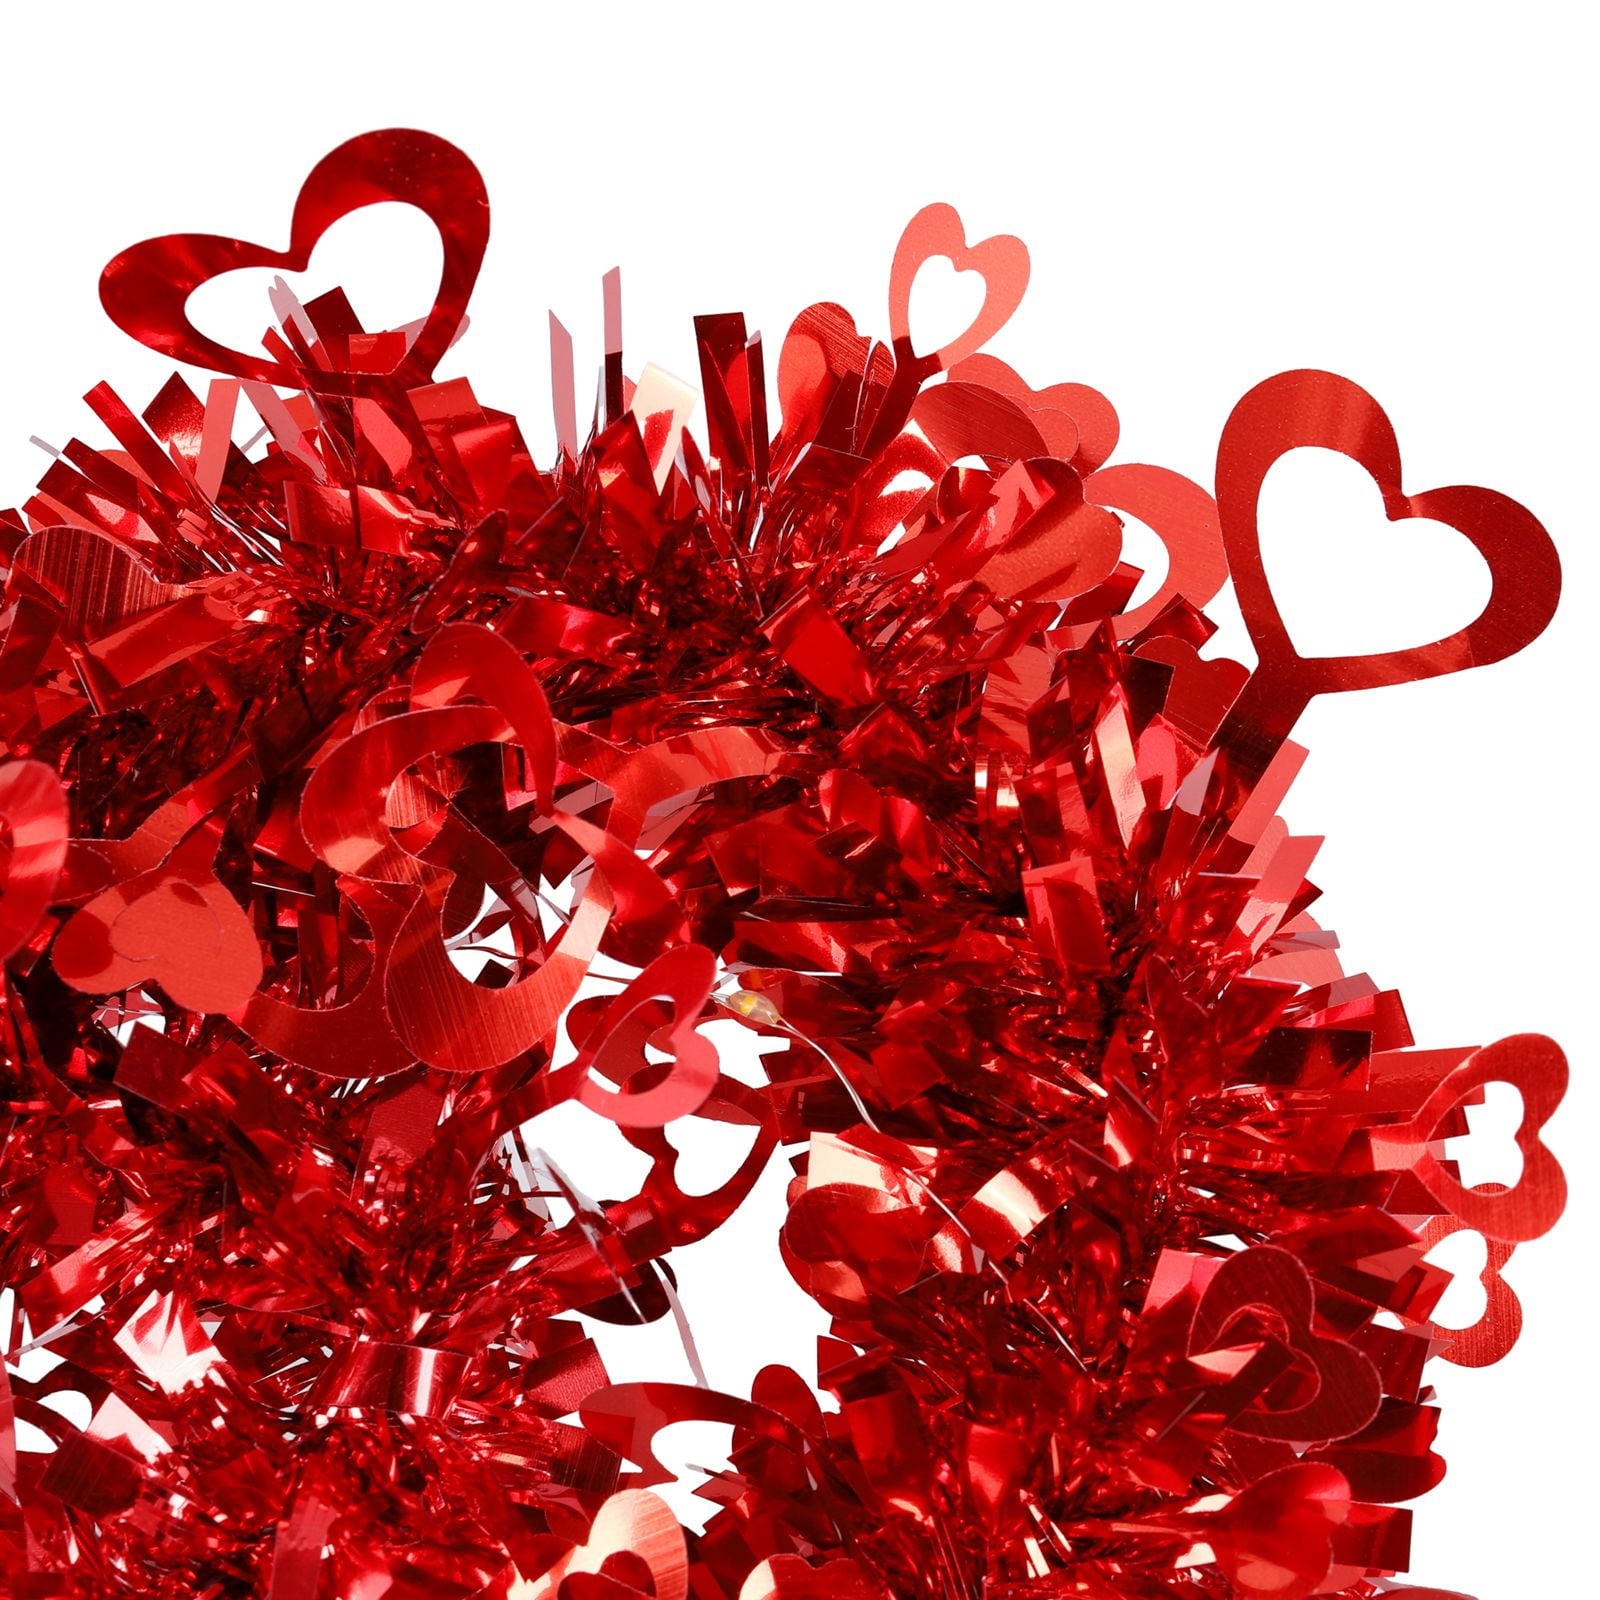 3 Pack Red Valentine Day Heart Wreath Tinsel Heart for Front Door with 20  Lights,Hanging Valentine Day Wreaths Heart Decorations Shaped Wreaths with